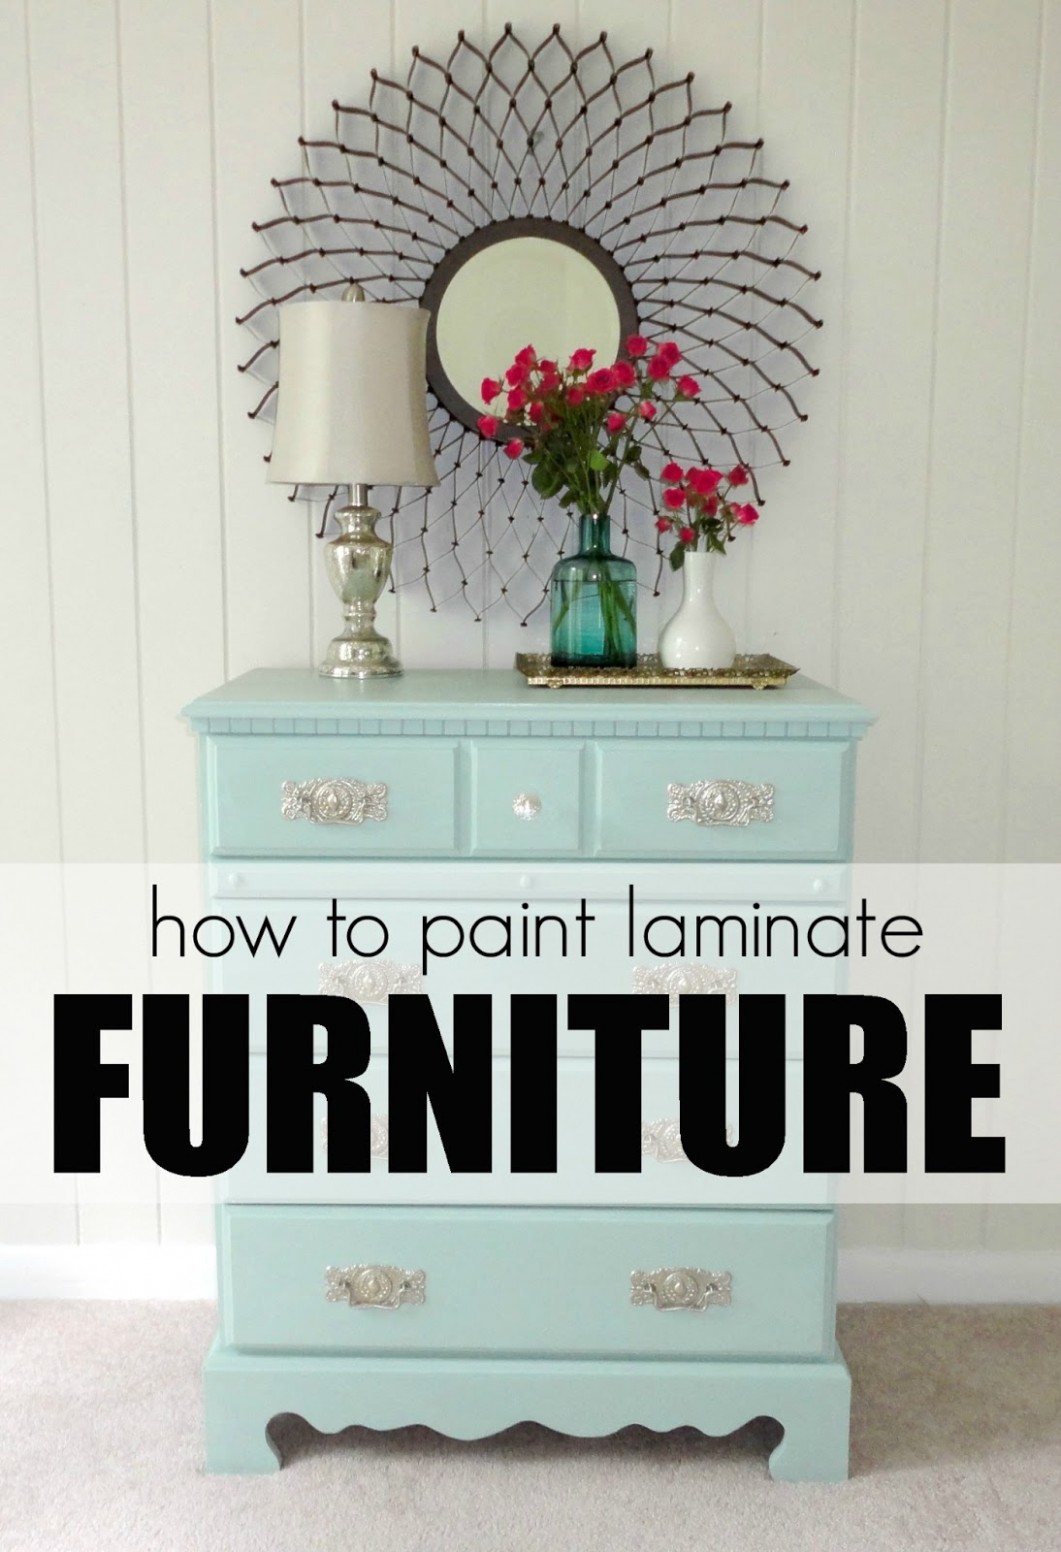 Livelovediy: How To Paint Laminate Furniture In 5 Easy Steps! Oil Based Paint Over Chalk Paint